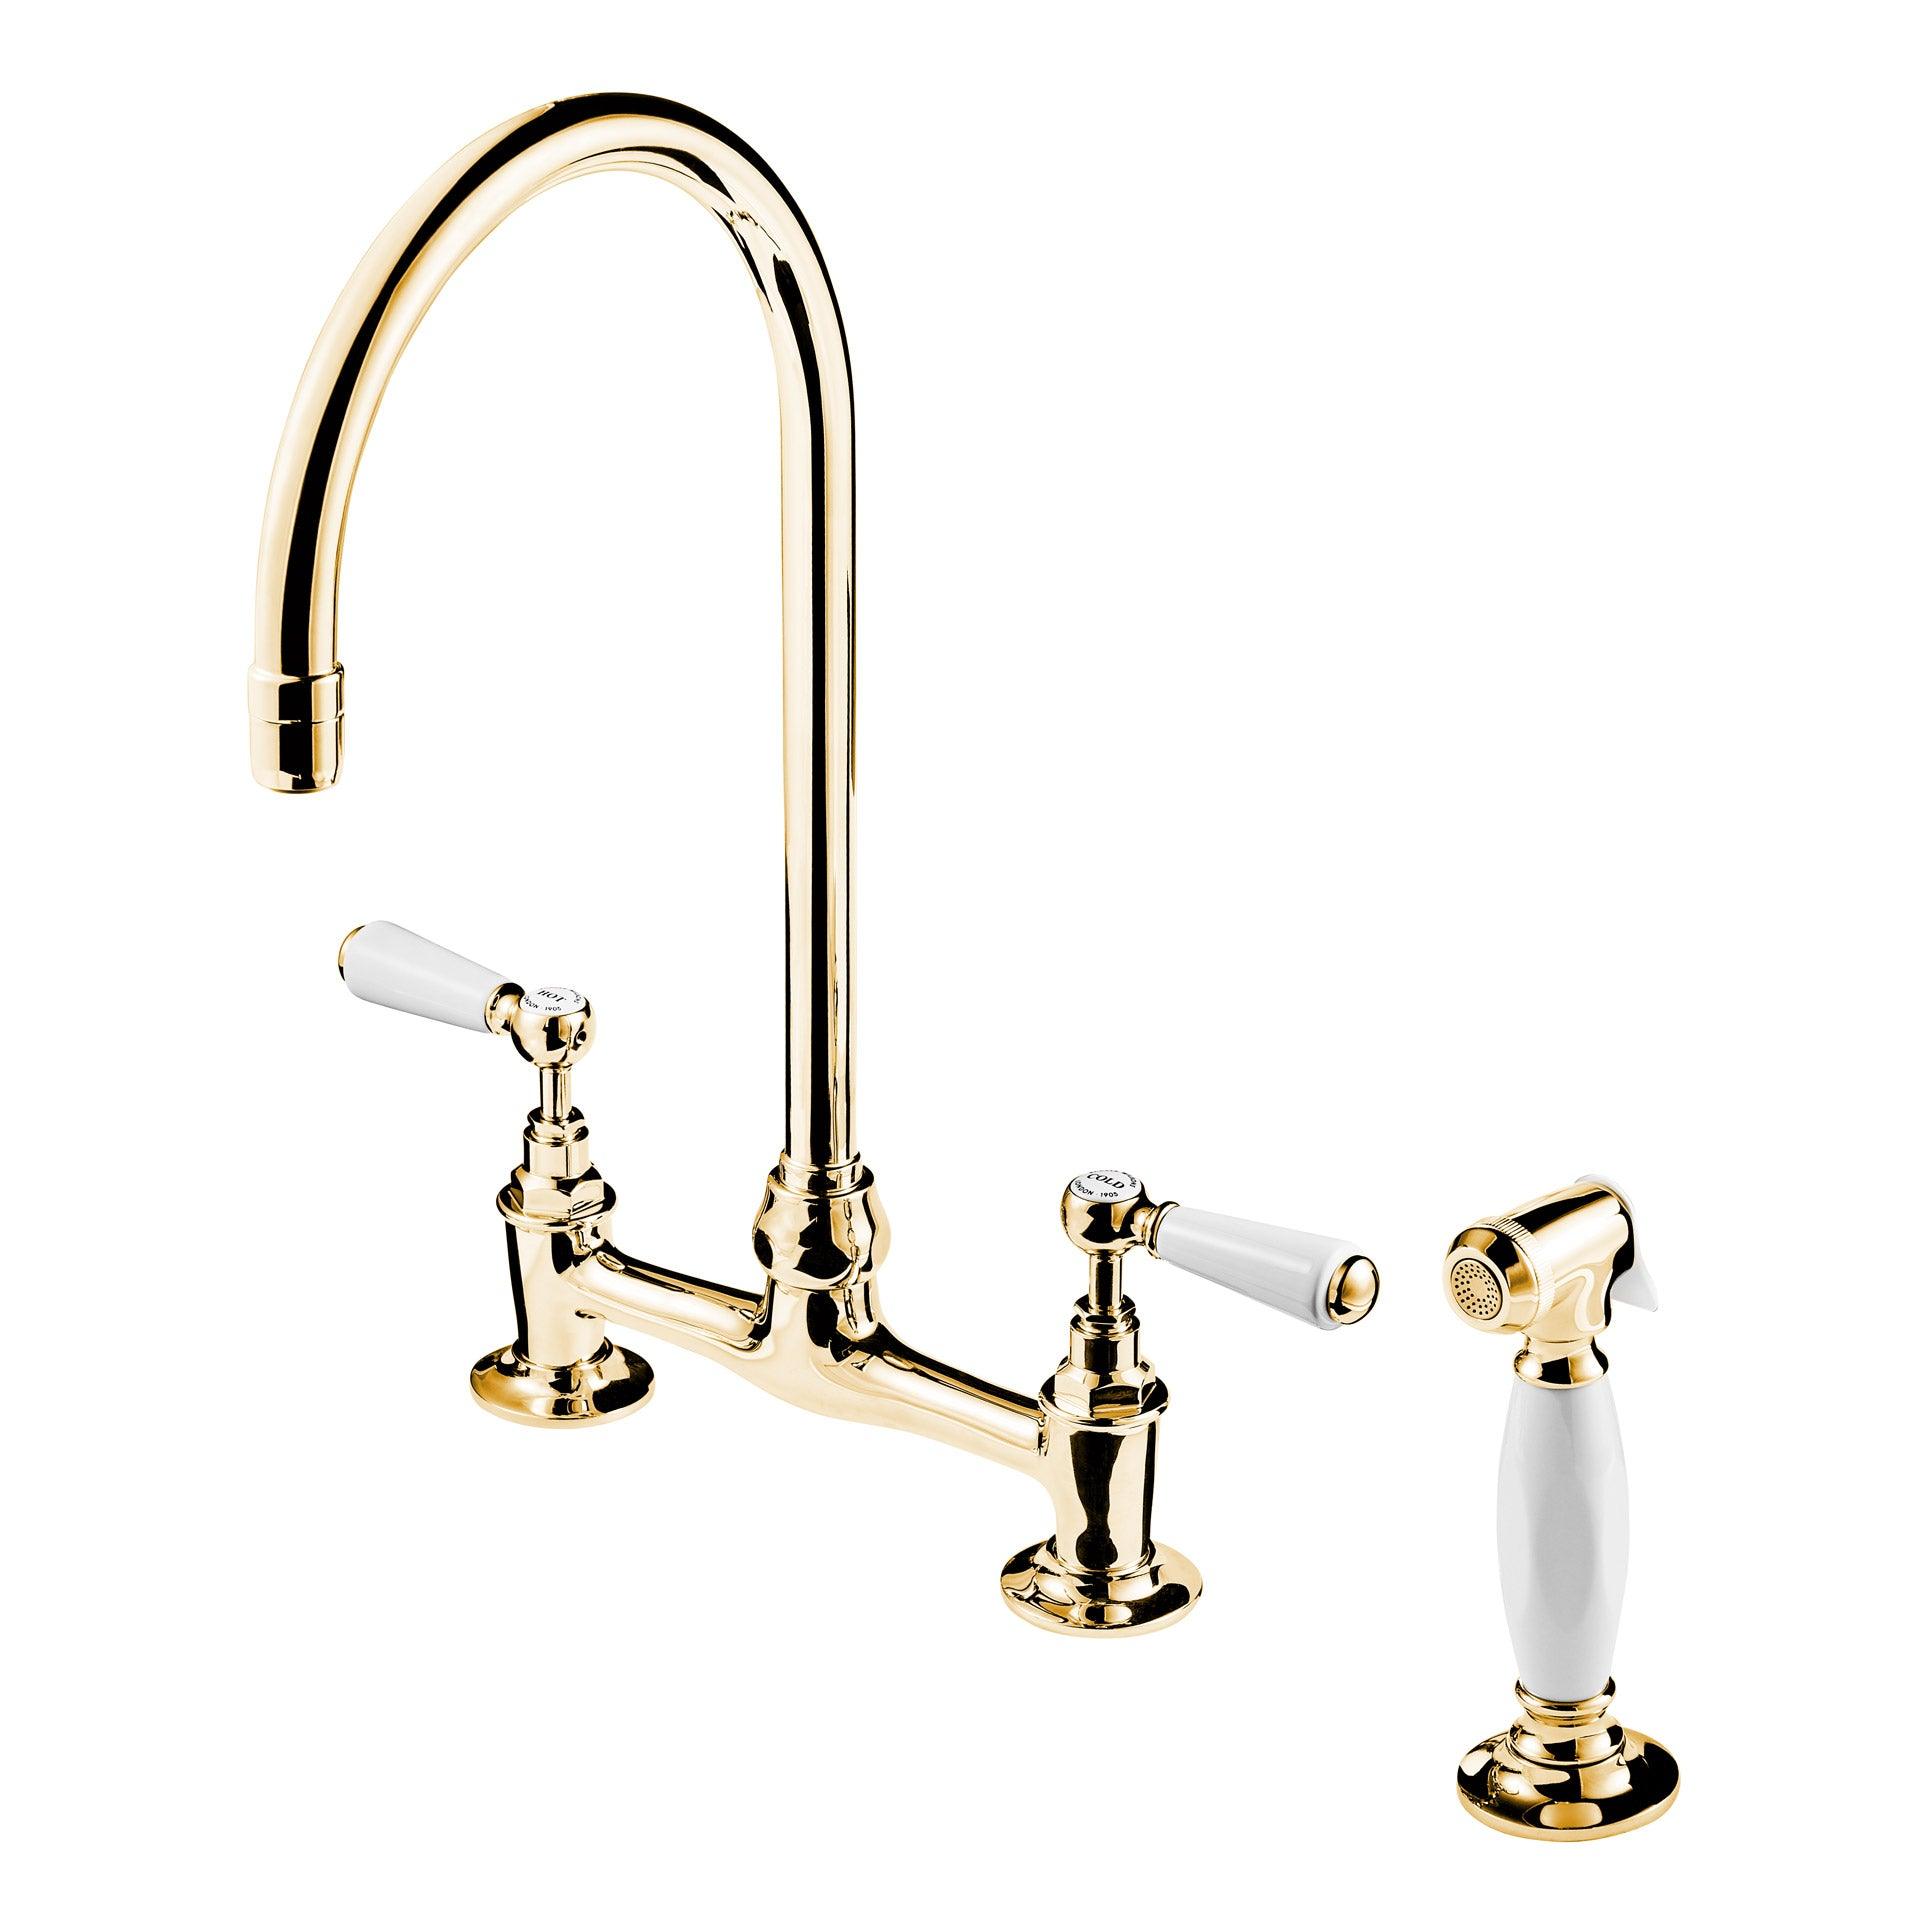 
  
  Barber Wilsons Regent 1890'S/1900'S 3 Hole Bridge Faucet 8" Swan Neck Swivel Spout with Hand Spray (Ceramic Disc) and White Porcelain Lever and Buttons and Spray - 16 Luxury Finishes
  
